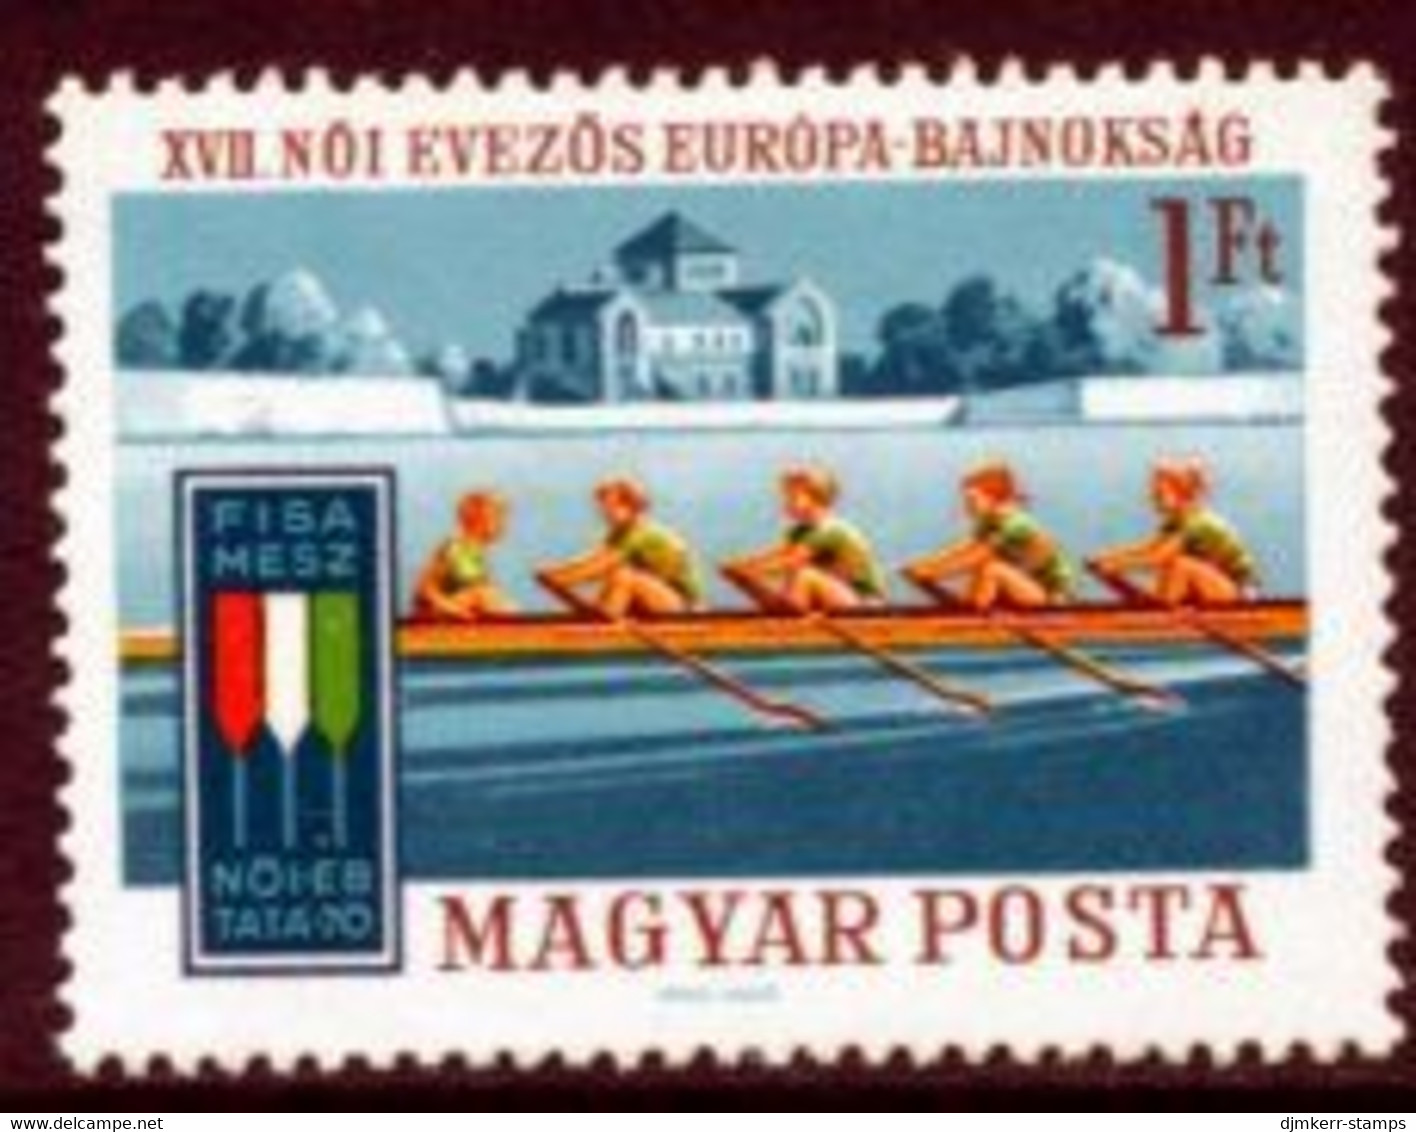 HUNGARY 1970  Women's Rowing Championship MNH / **.  Michel 2601 - Unused Stamps